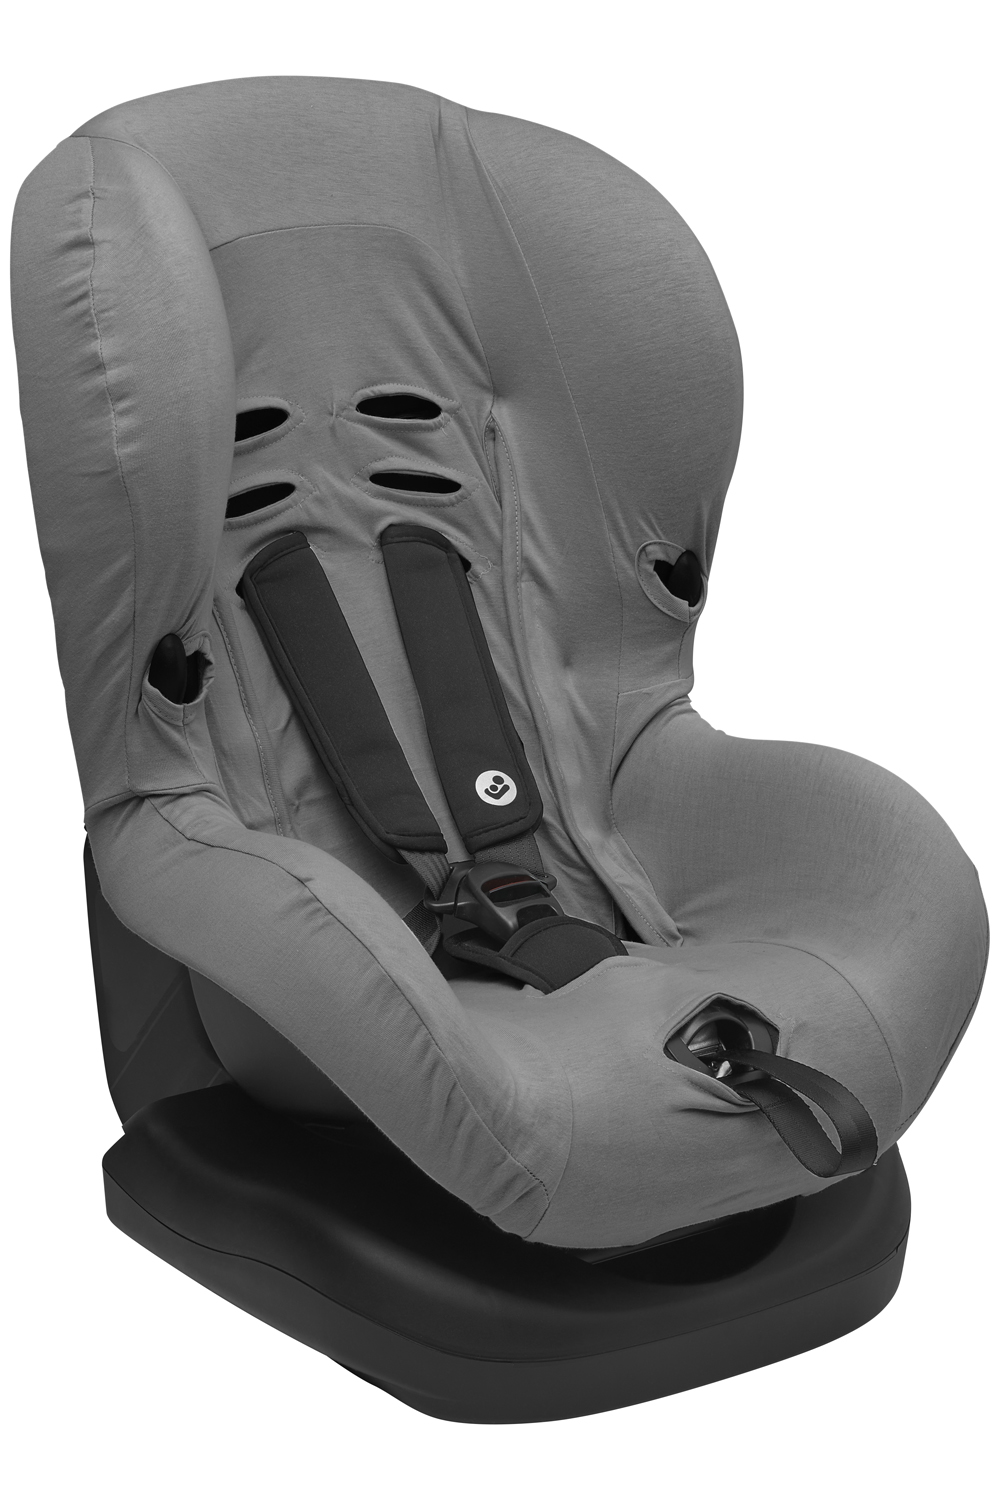 Car seat cover Uni - grey - Group 1+